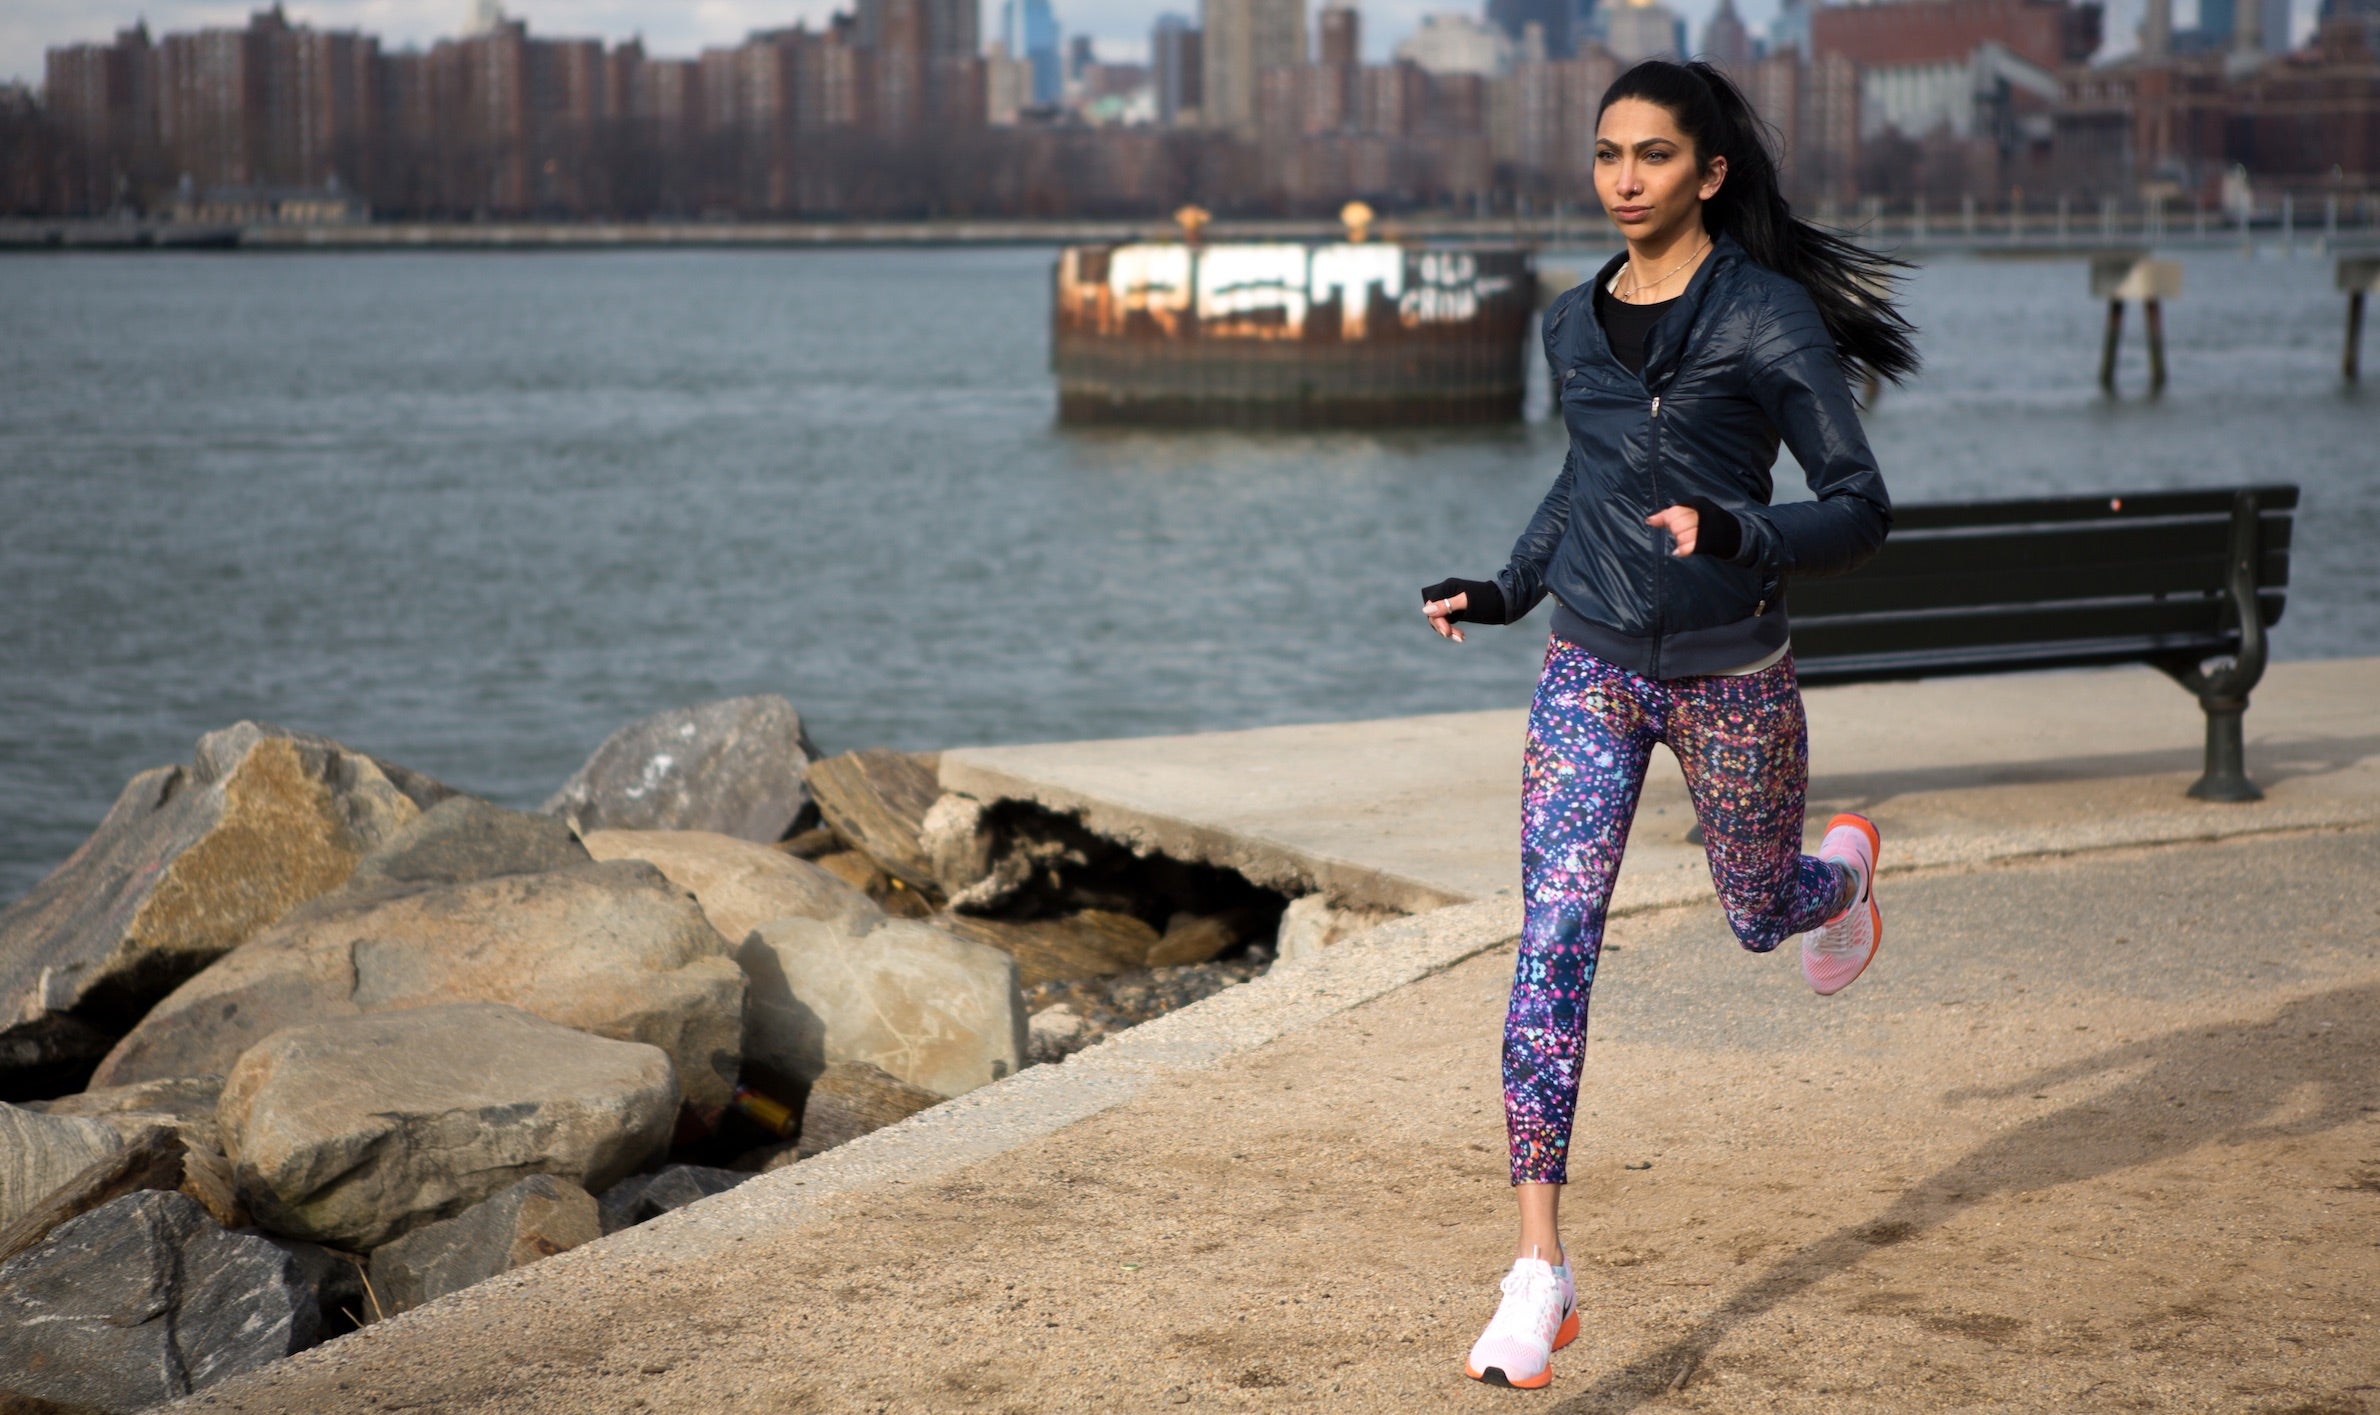 Do Women Need Gender-Specific Running Shoes?